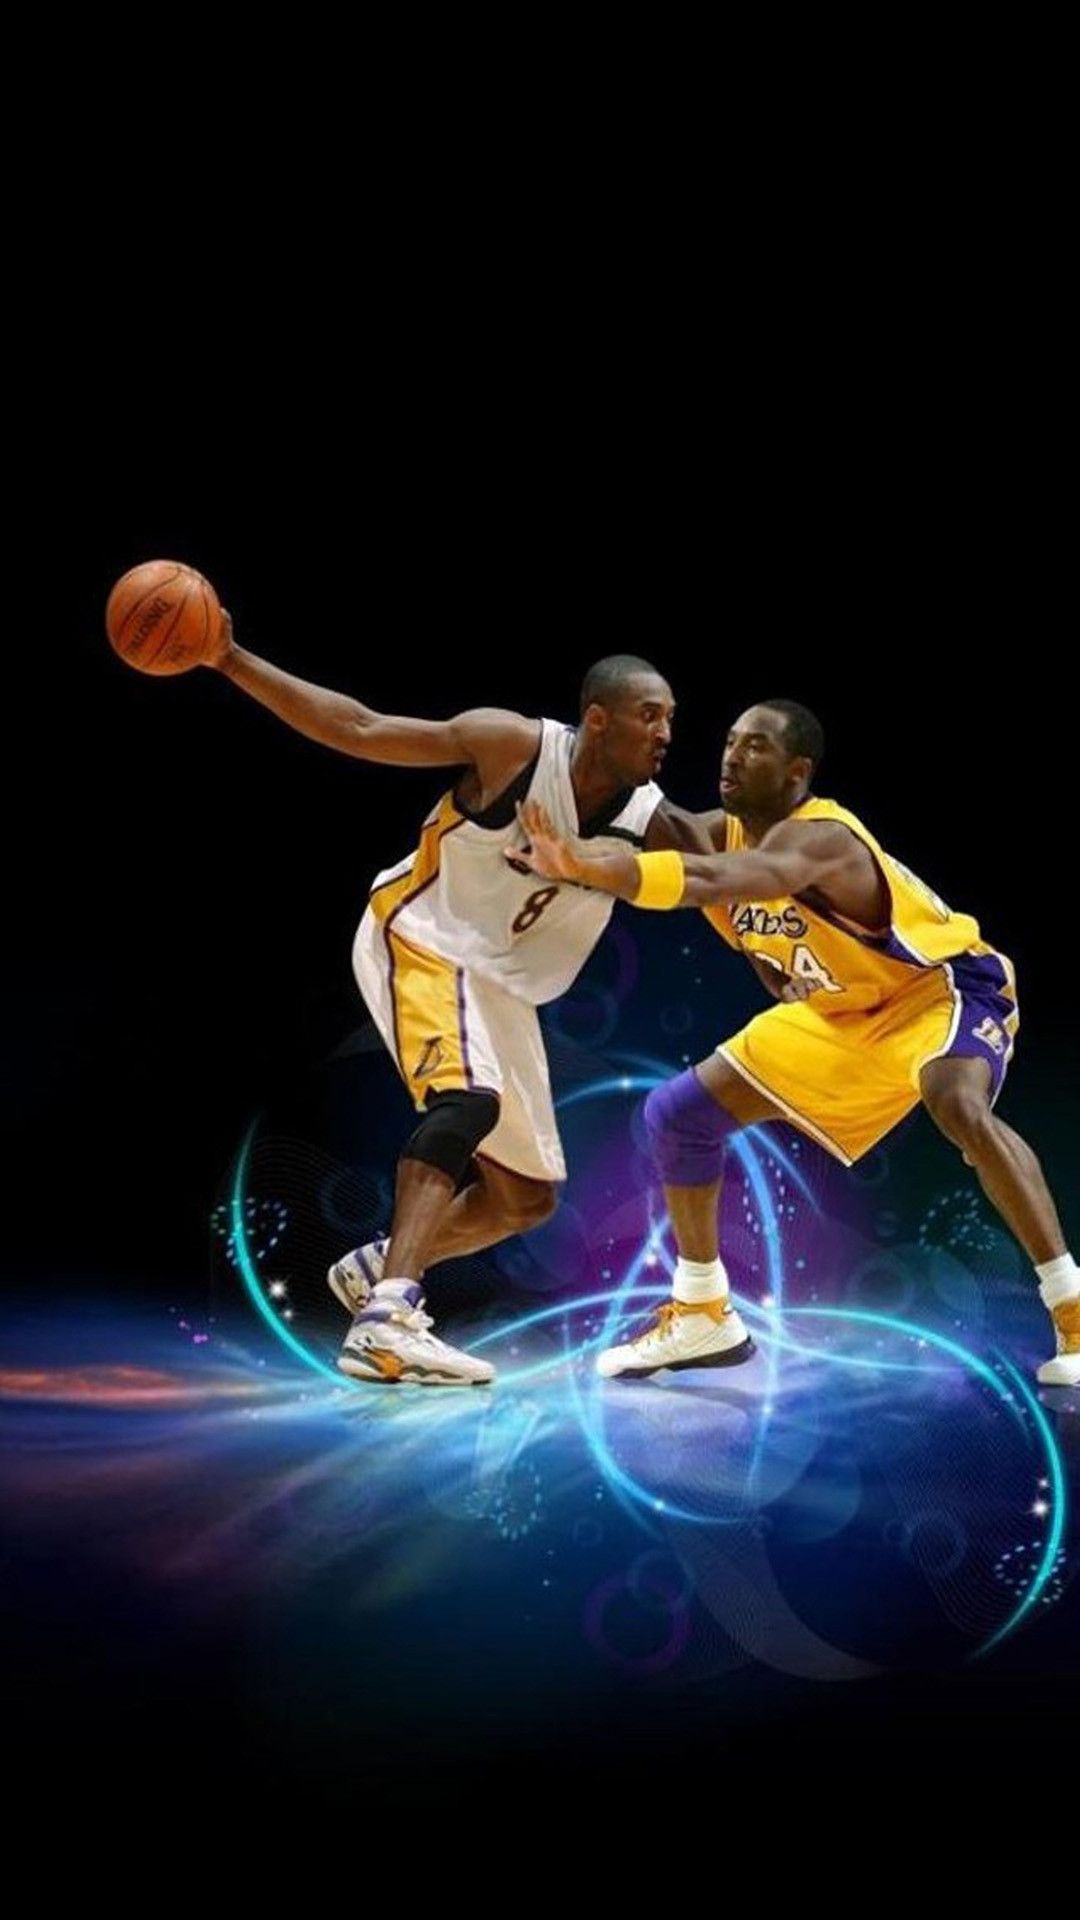 Cool Basketball Android Background. Kobe bryant wallpaper, Kobe bryant, Kobe bryant picture